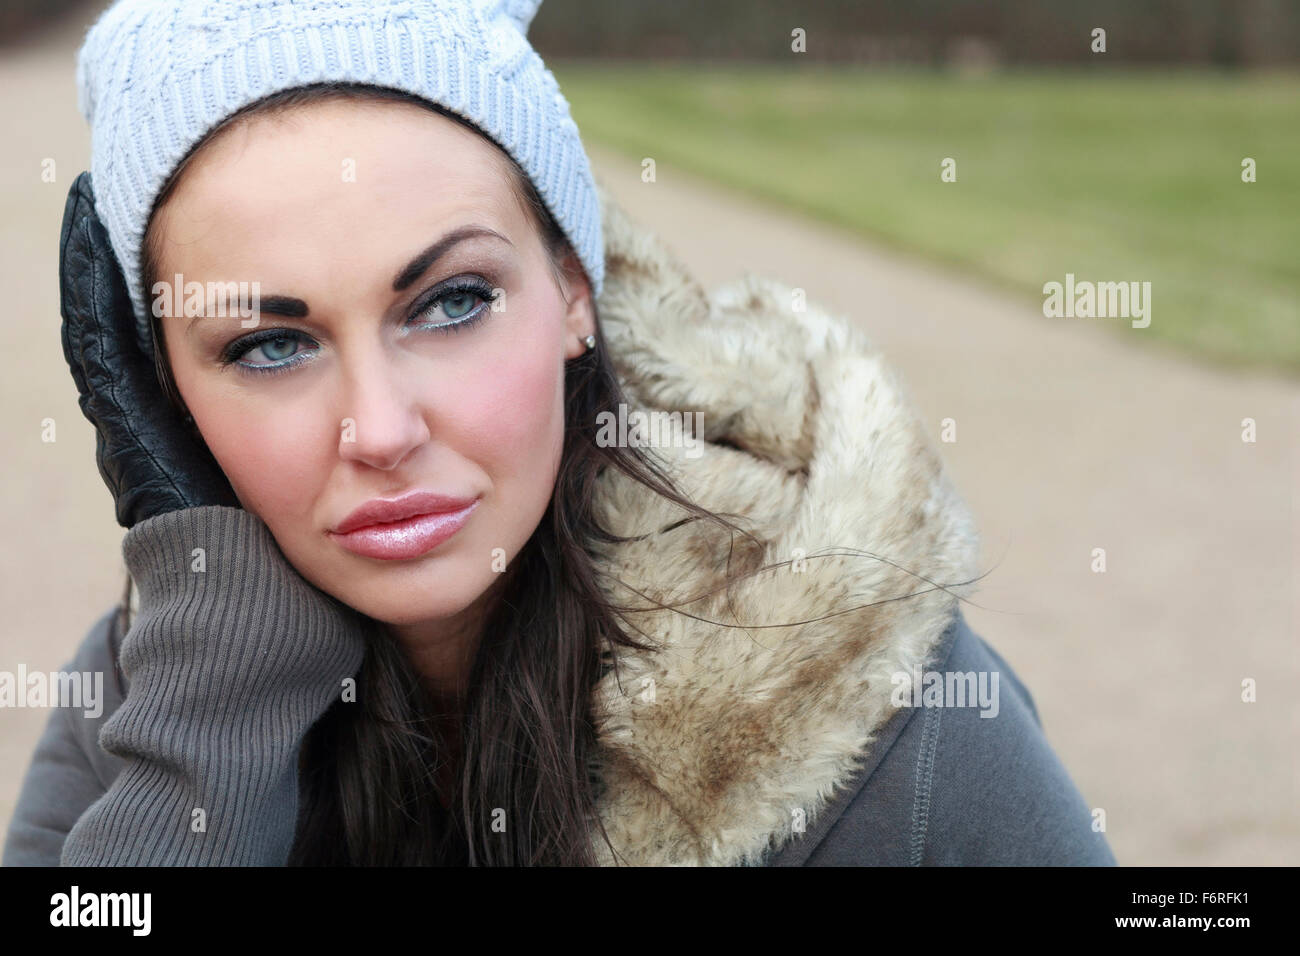 Outdoor portrait of beautiful attractive young brunette woman in warm fur lined winter jacket or coat gloves and hat looking away into distance  Model Release: Yes.  Property release: No. Stock Photo